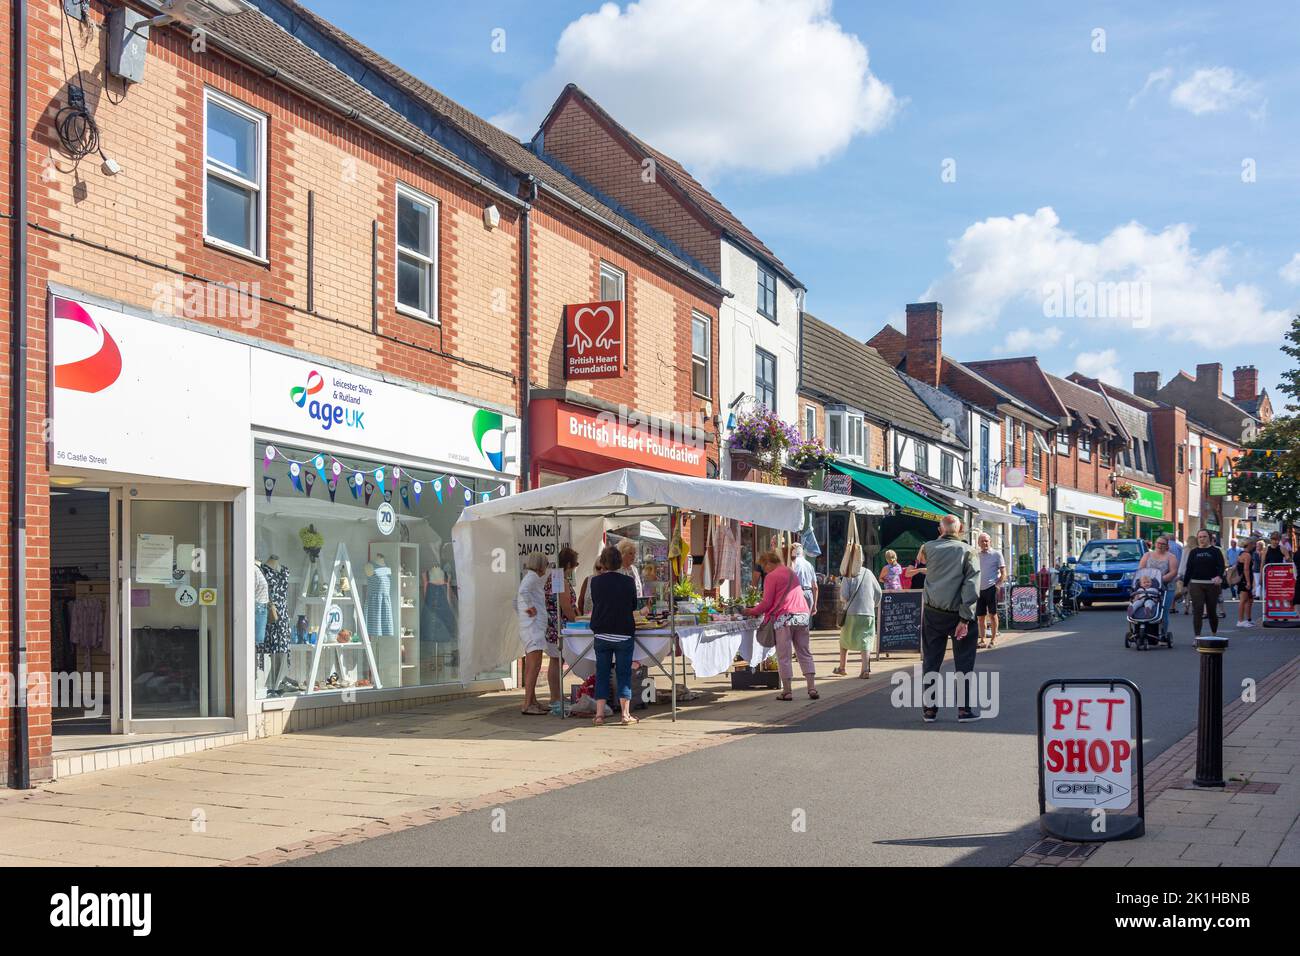 Charity market stall, Castle Street, Hinckley, Leicestershire, England, United Kingdom Stock Photo